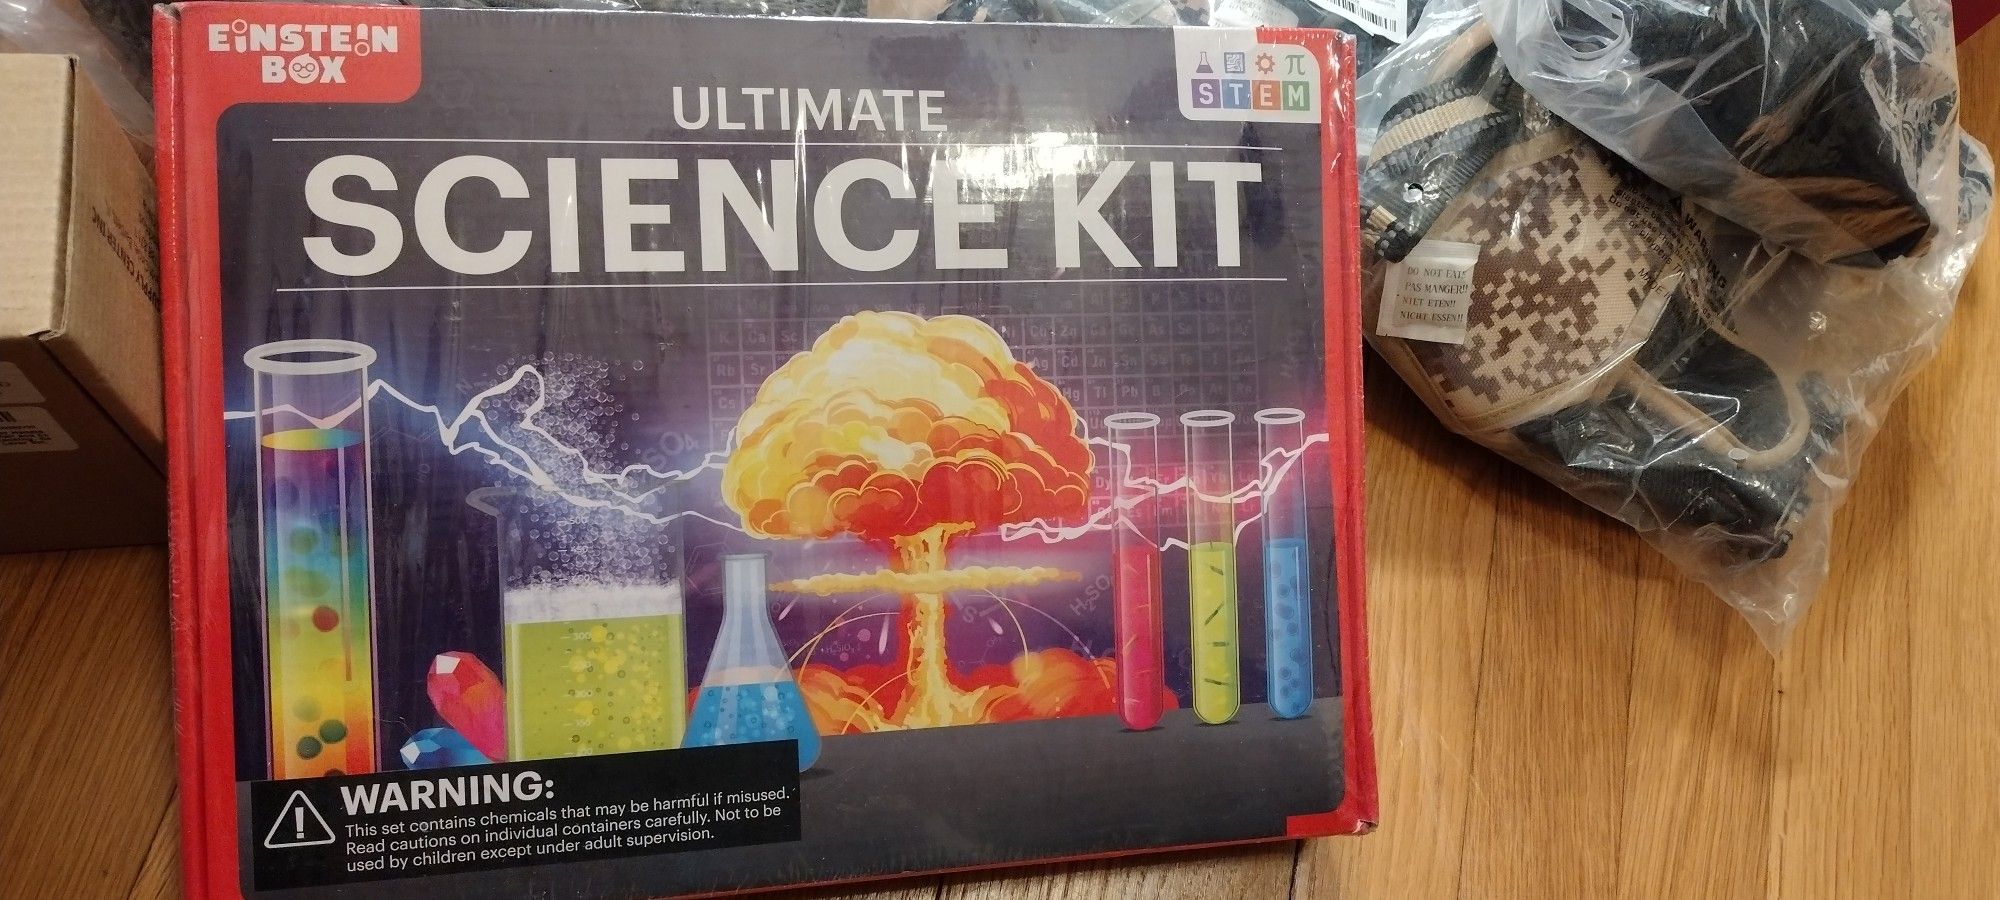 Einstein Box Ultimate Science Kit 120 Experiments